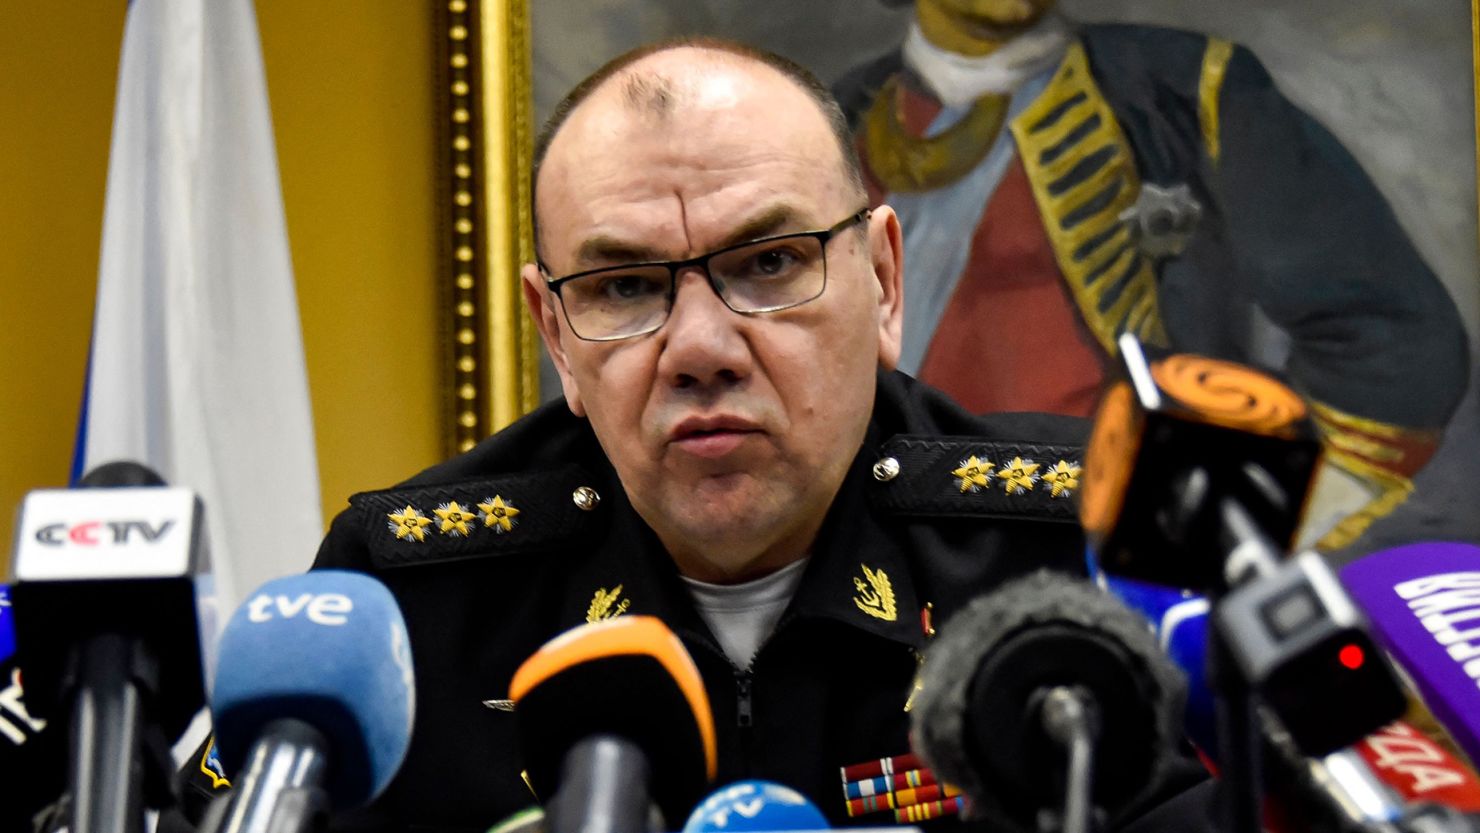 Alexander Moiseyev, the new head of the Russian Navy, is seen speaking to the media at the Arctic port of Severomorsk on May 13, 2021. Moiseev was revealed by state media on Tuesday as the acting commander in chief of the Russian Navy.